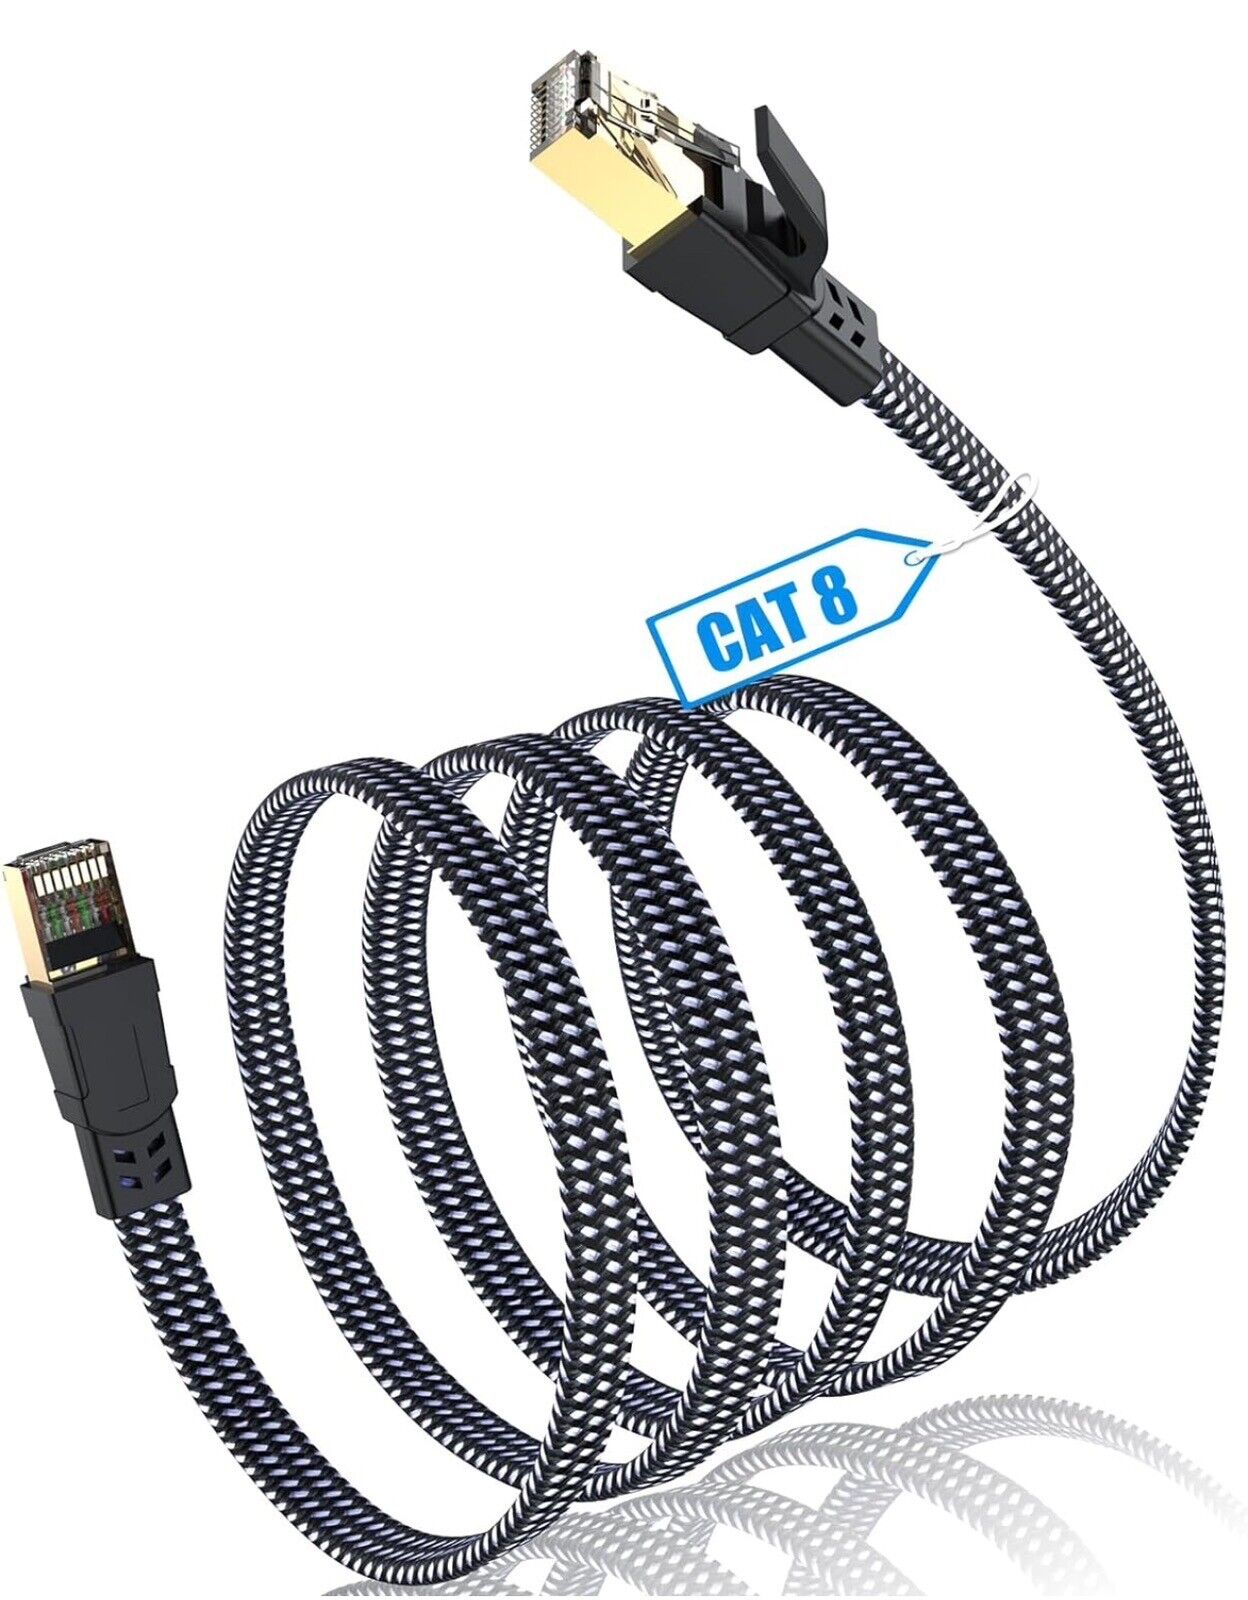 Braided 6FT-35FT  Heavy Duty Cat8 Ethernet Cable Super Speed 40Gbps/2000Mhz RJ45